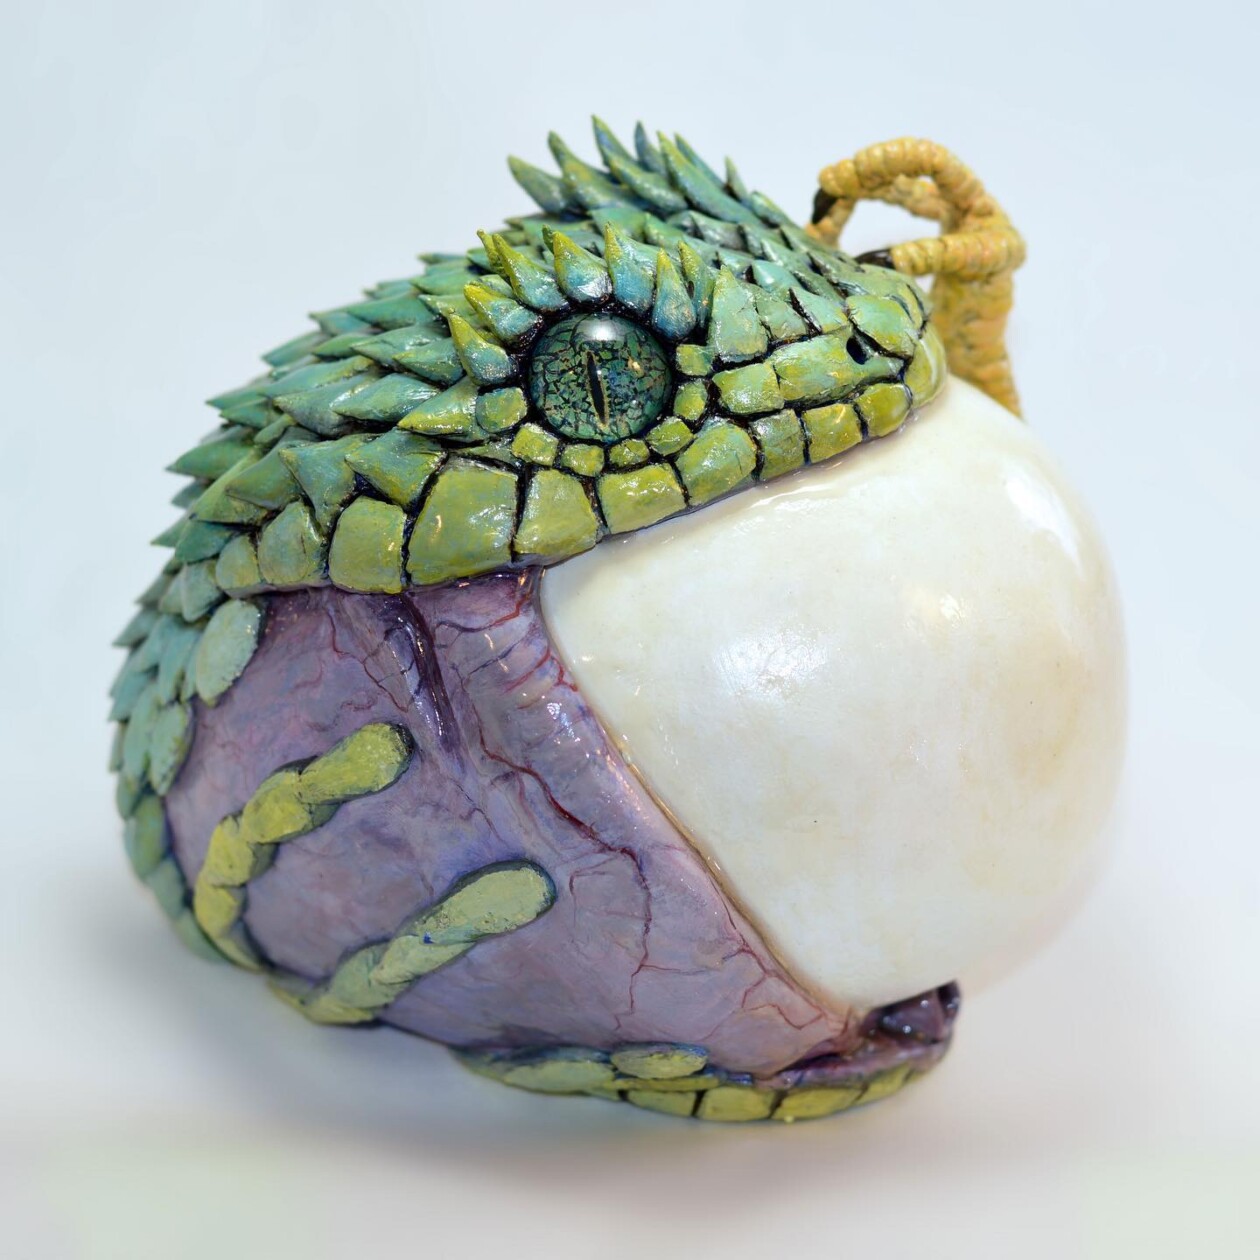 Fantastic Eggshell Sculptures Of Earth's Most Ancient Denizens By Sarah Lee (15)